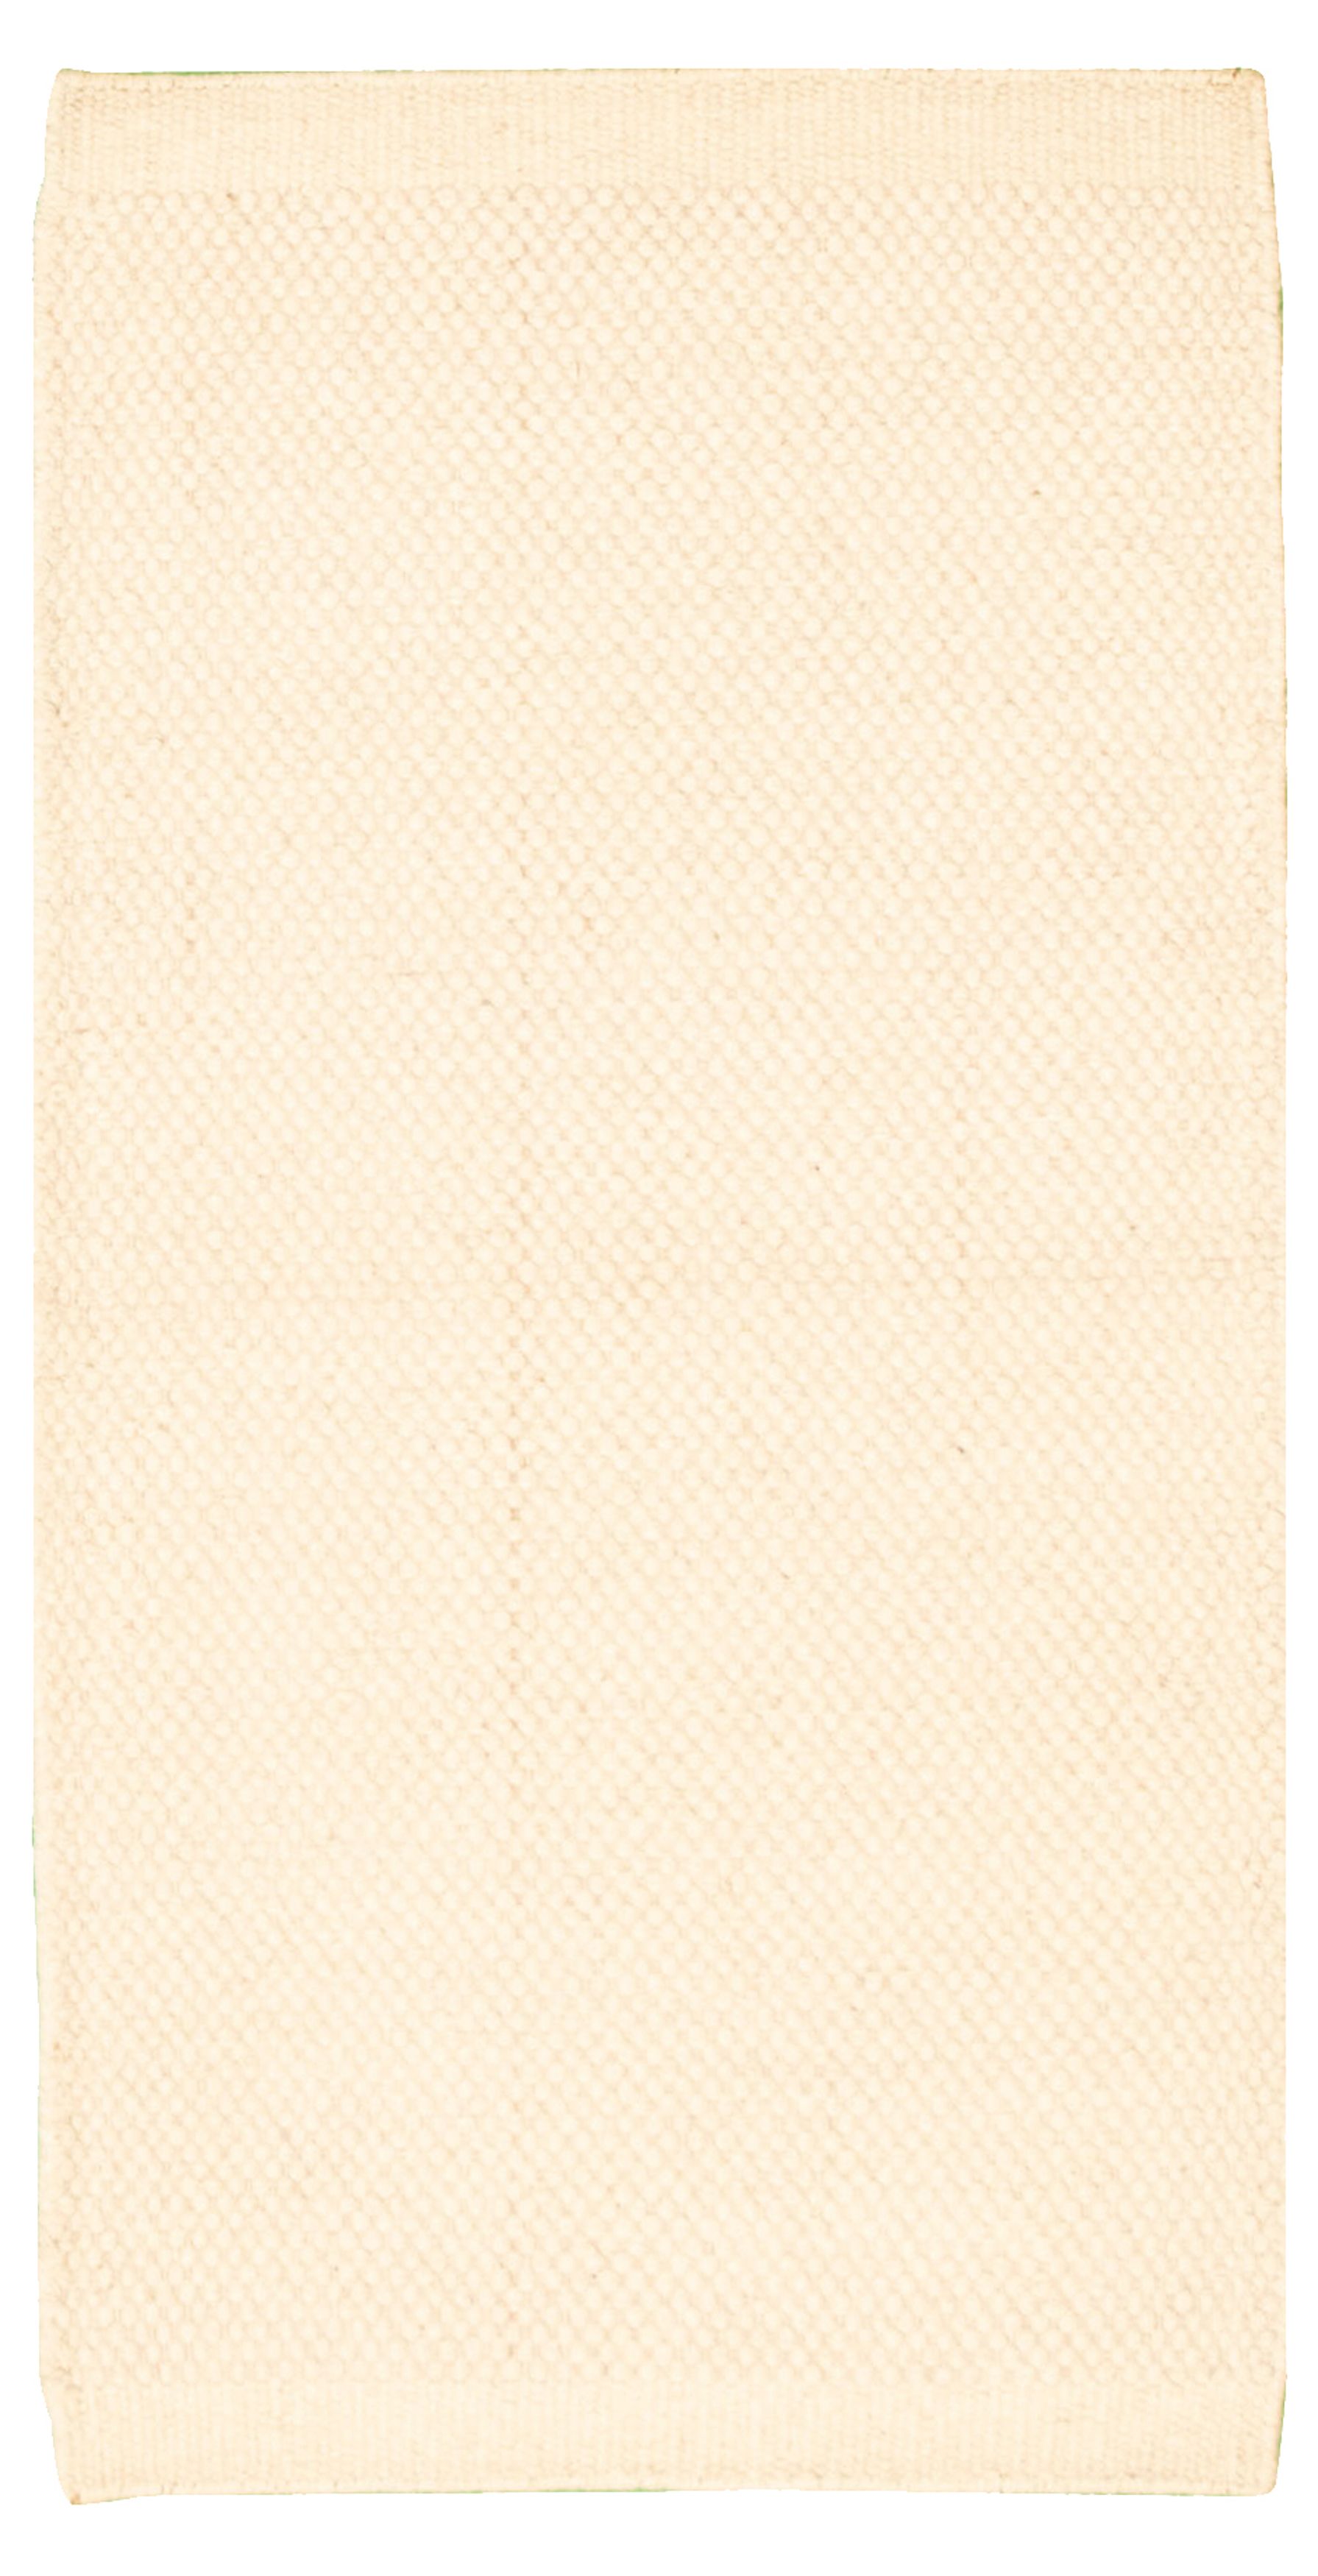 Hand loomed Bungalow CR Cream Wool Dhurrie 2'4" x 4'5" Size: 2'4" x 4'5"  